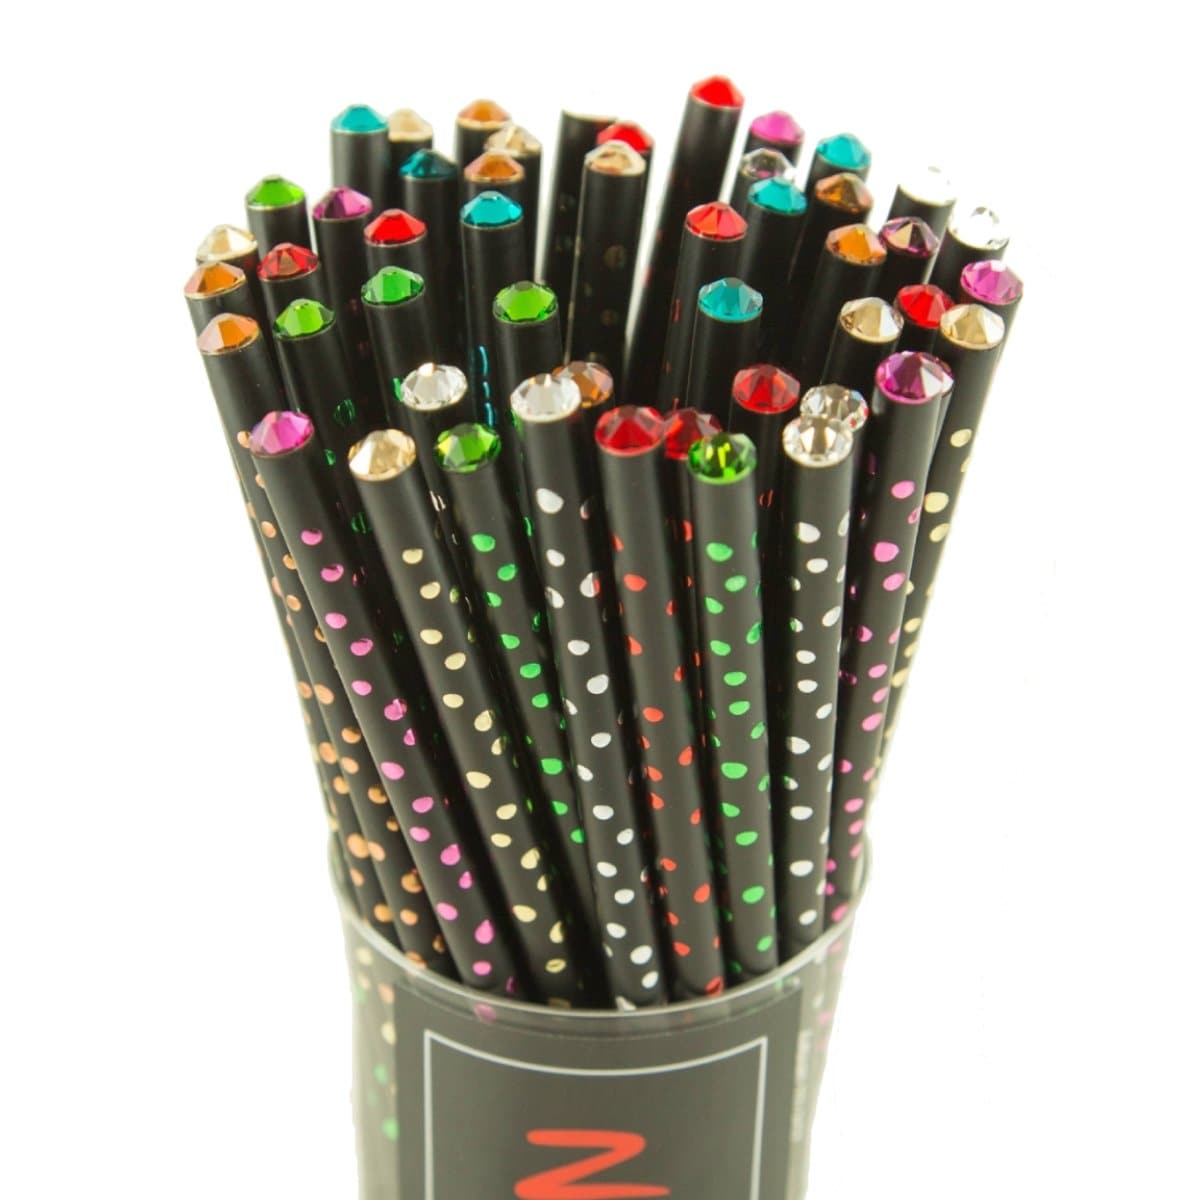 ZOETZL Pencil with Swarovski Crystal and metallic confetti, Assorted Colors